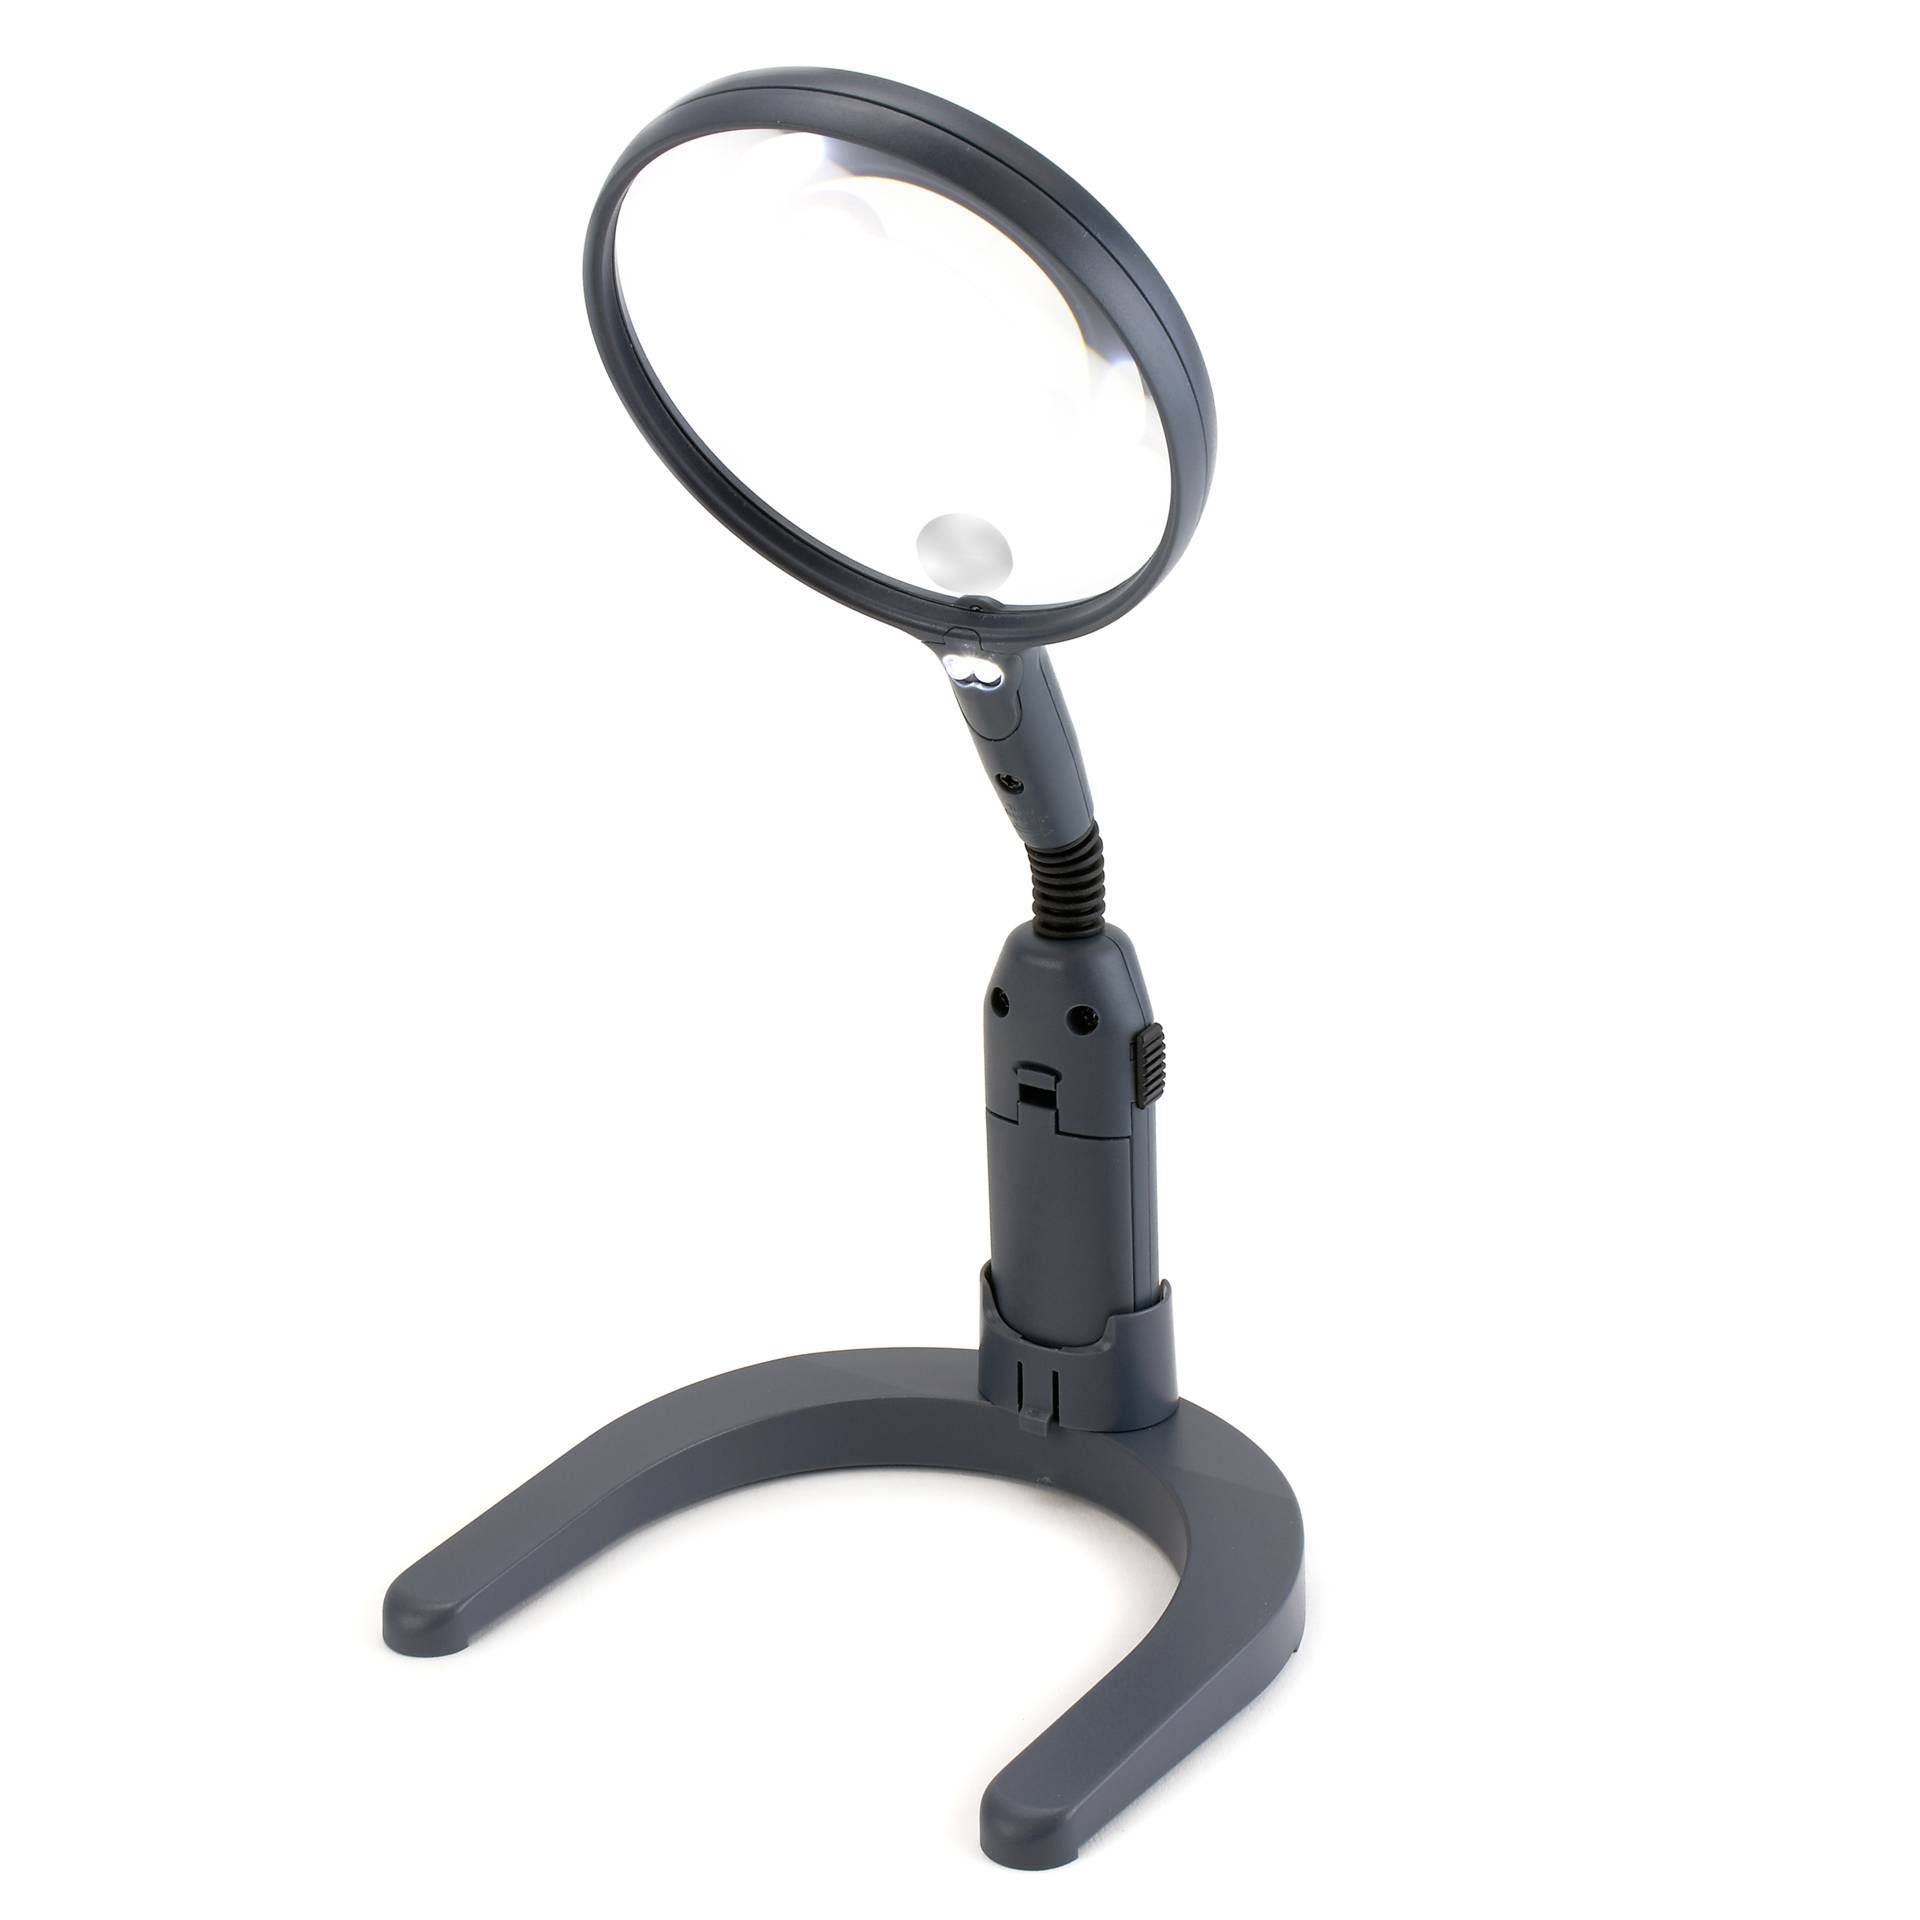 Carson Optical MagniLamp Flexible Arm Lighted Magnifier